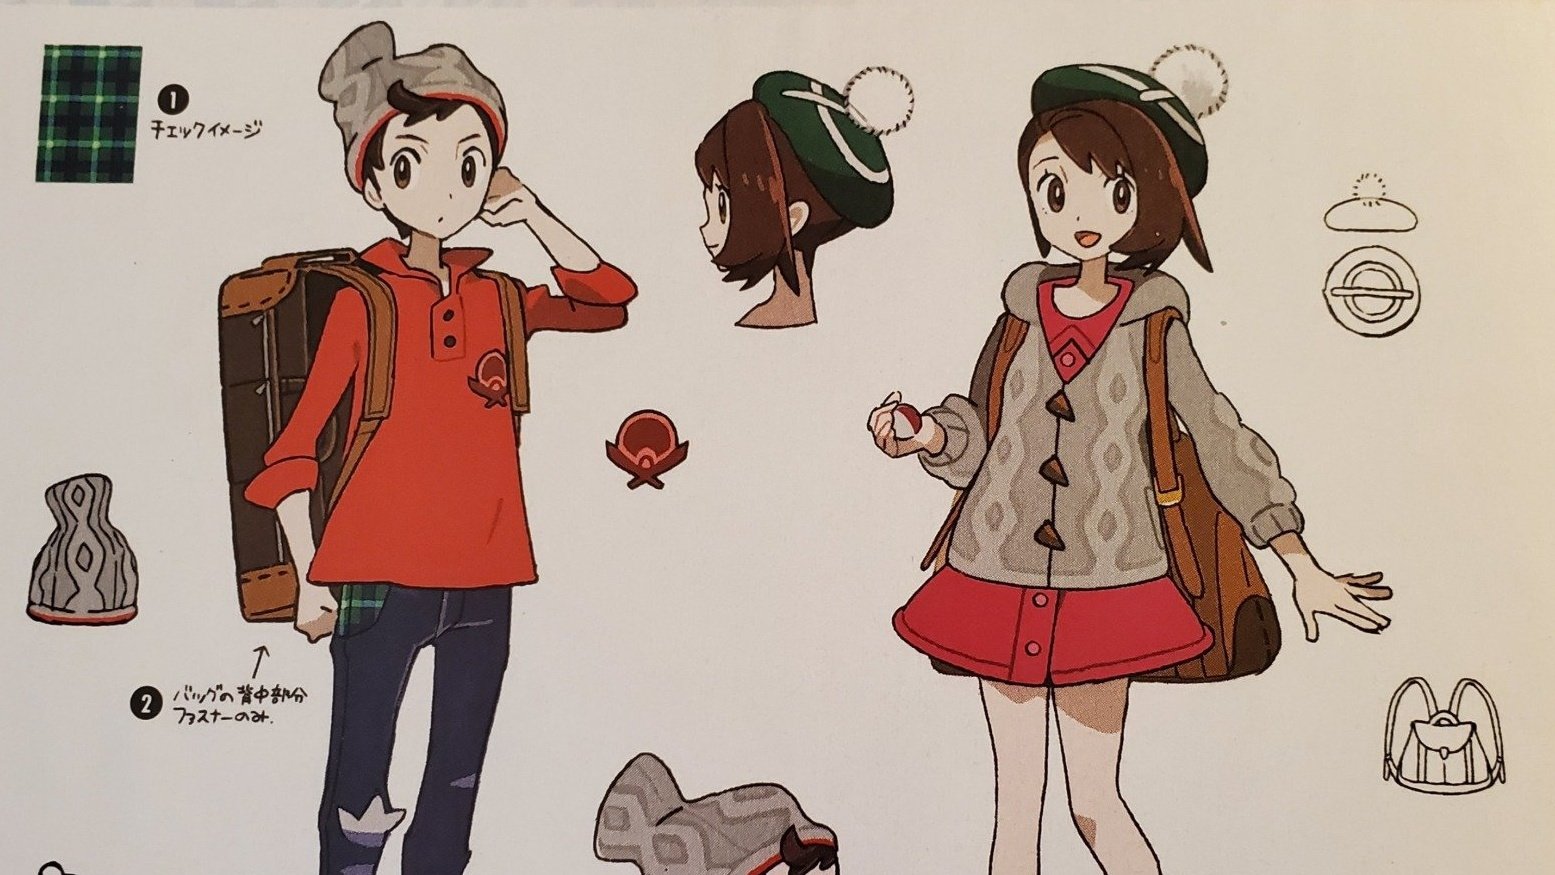 Gallery Pokemon Sword And Shield Concept Art Shows Gym Leaders